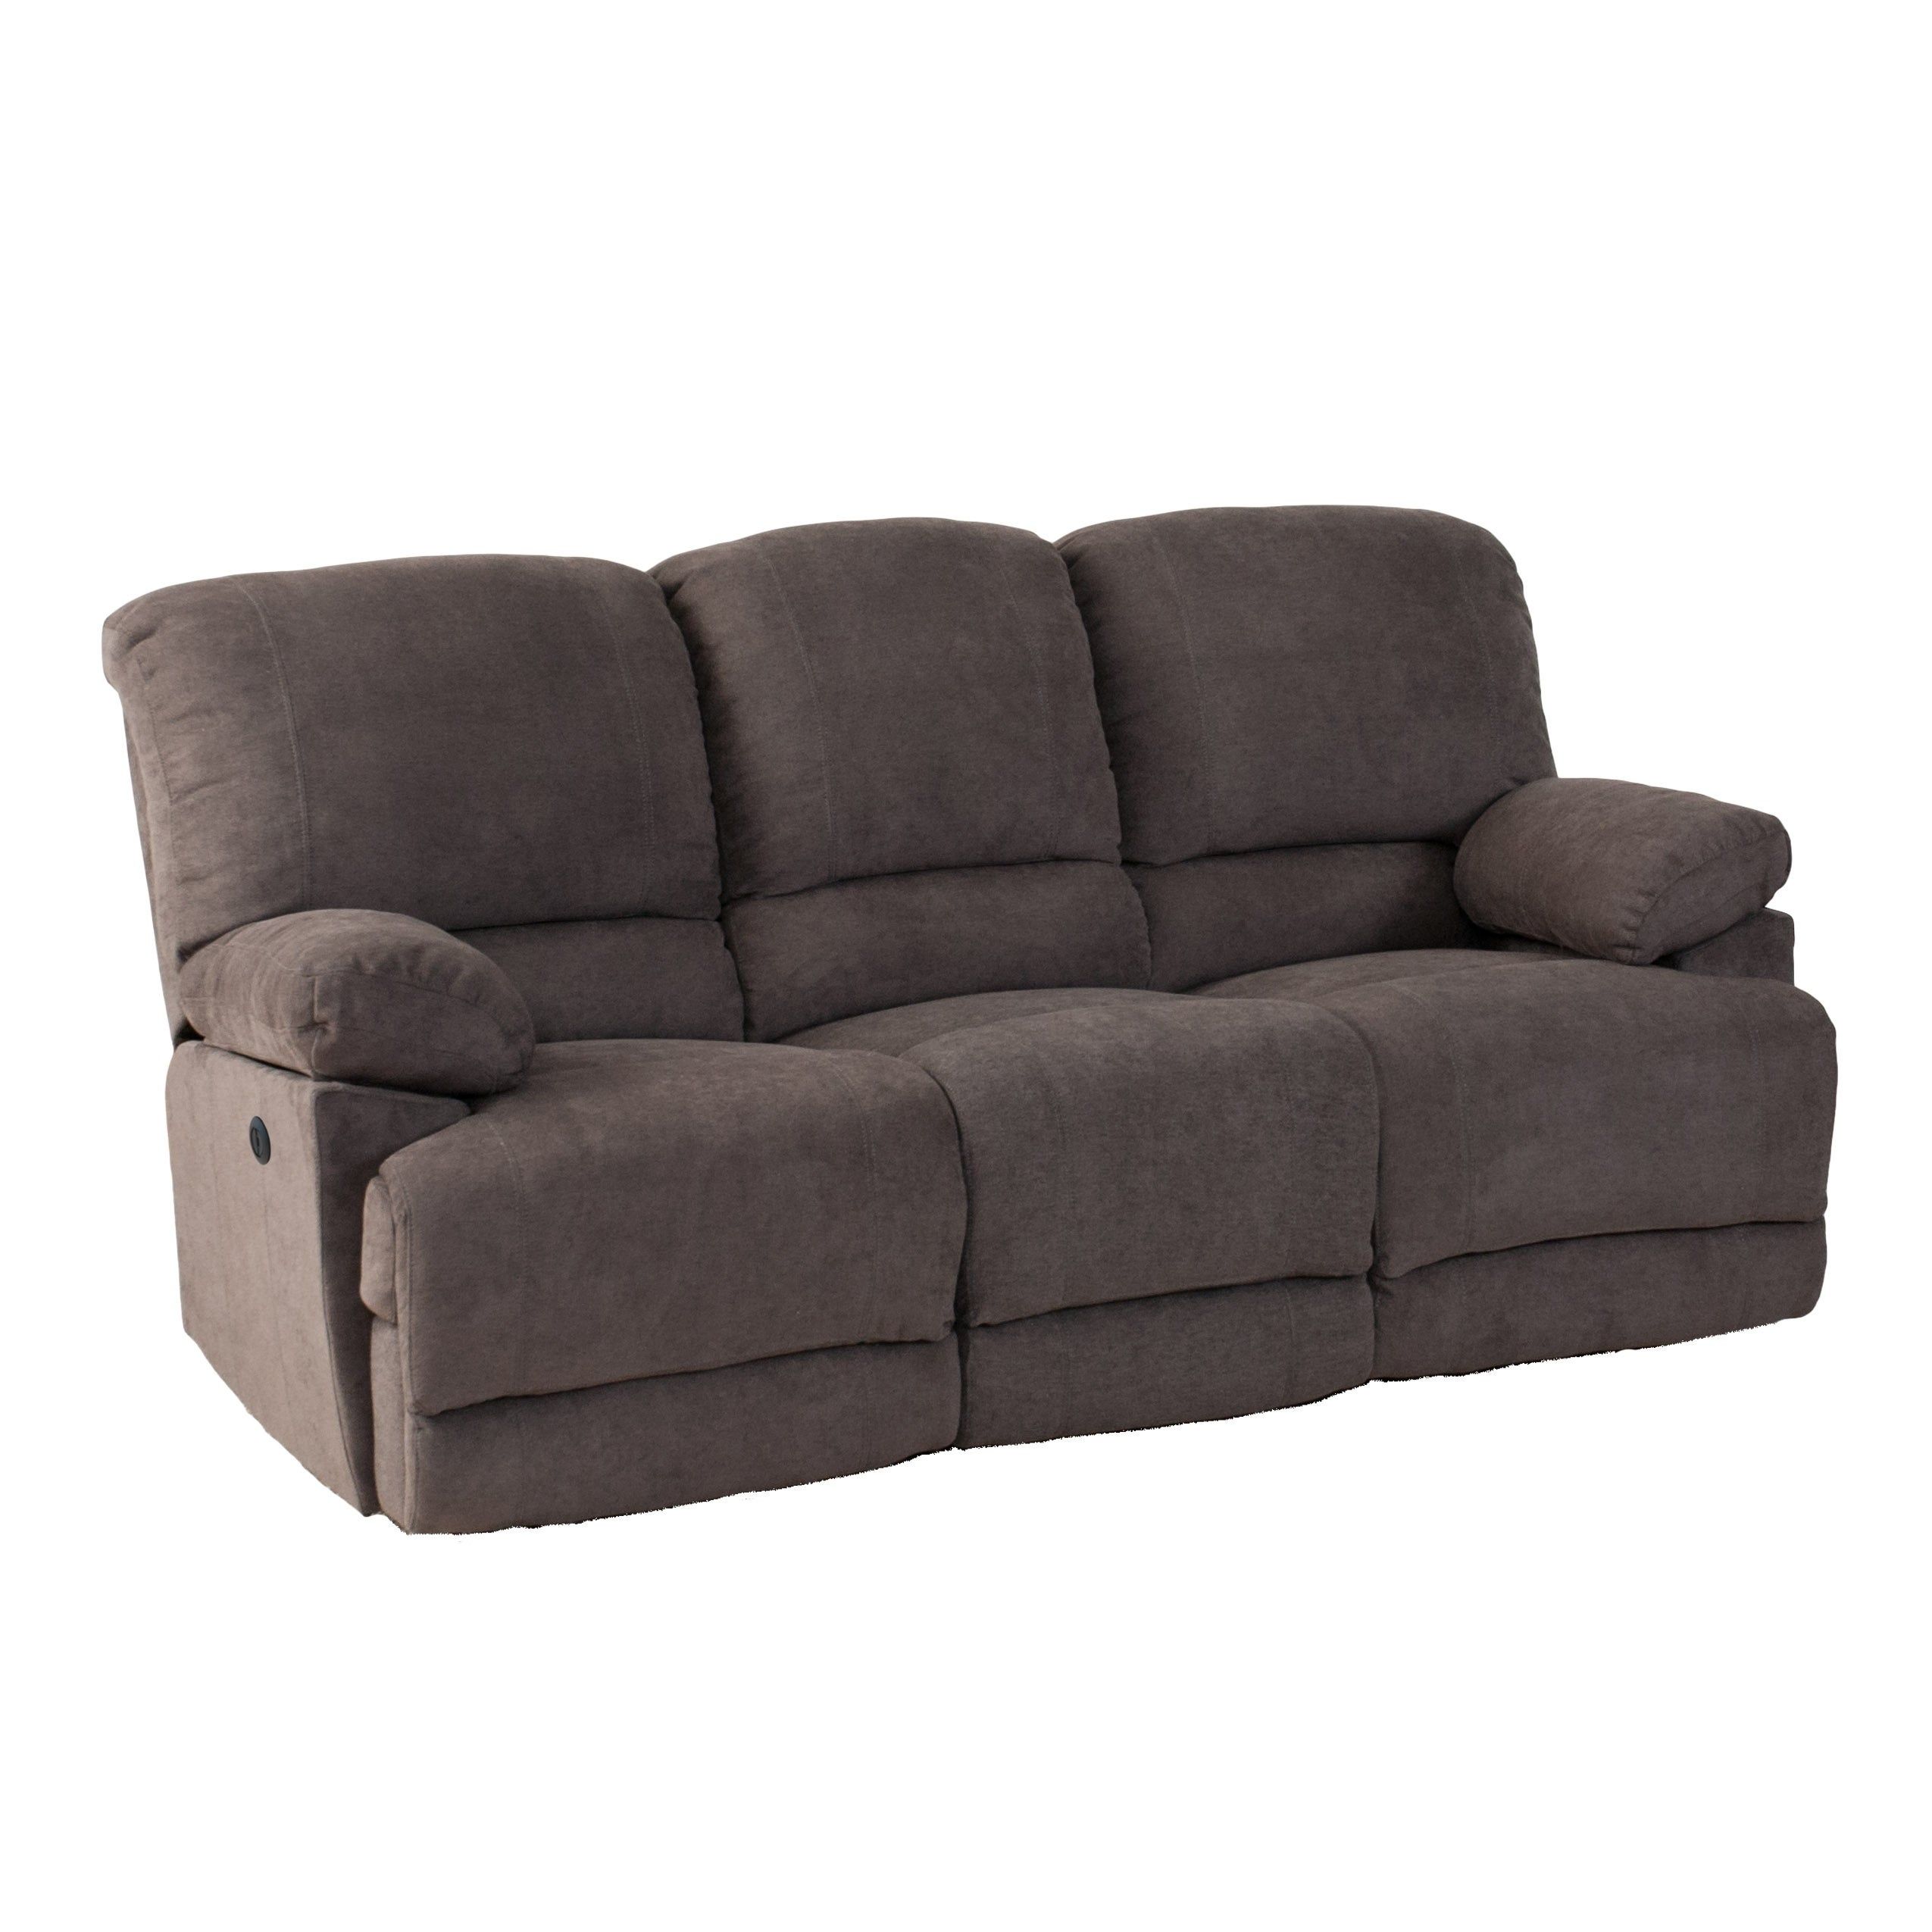 Chenille Fabric Power Reclining Sofa With Usb Port | Ebay With Power Reclining Sofas (View 11 of 15)